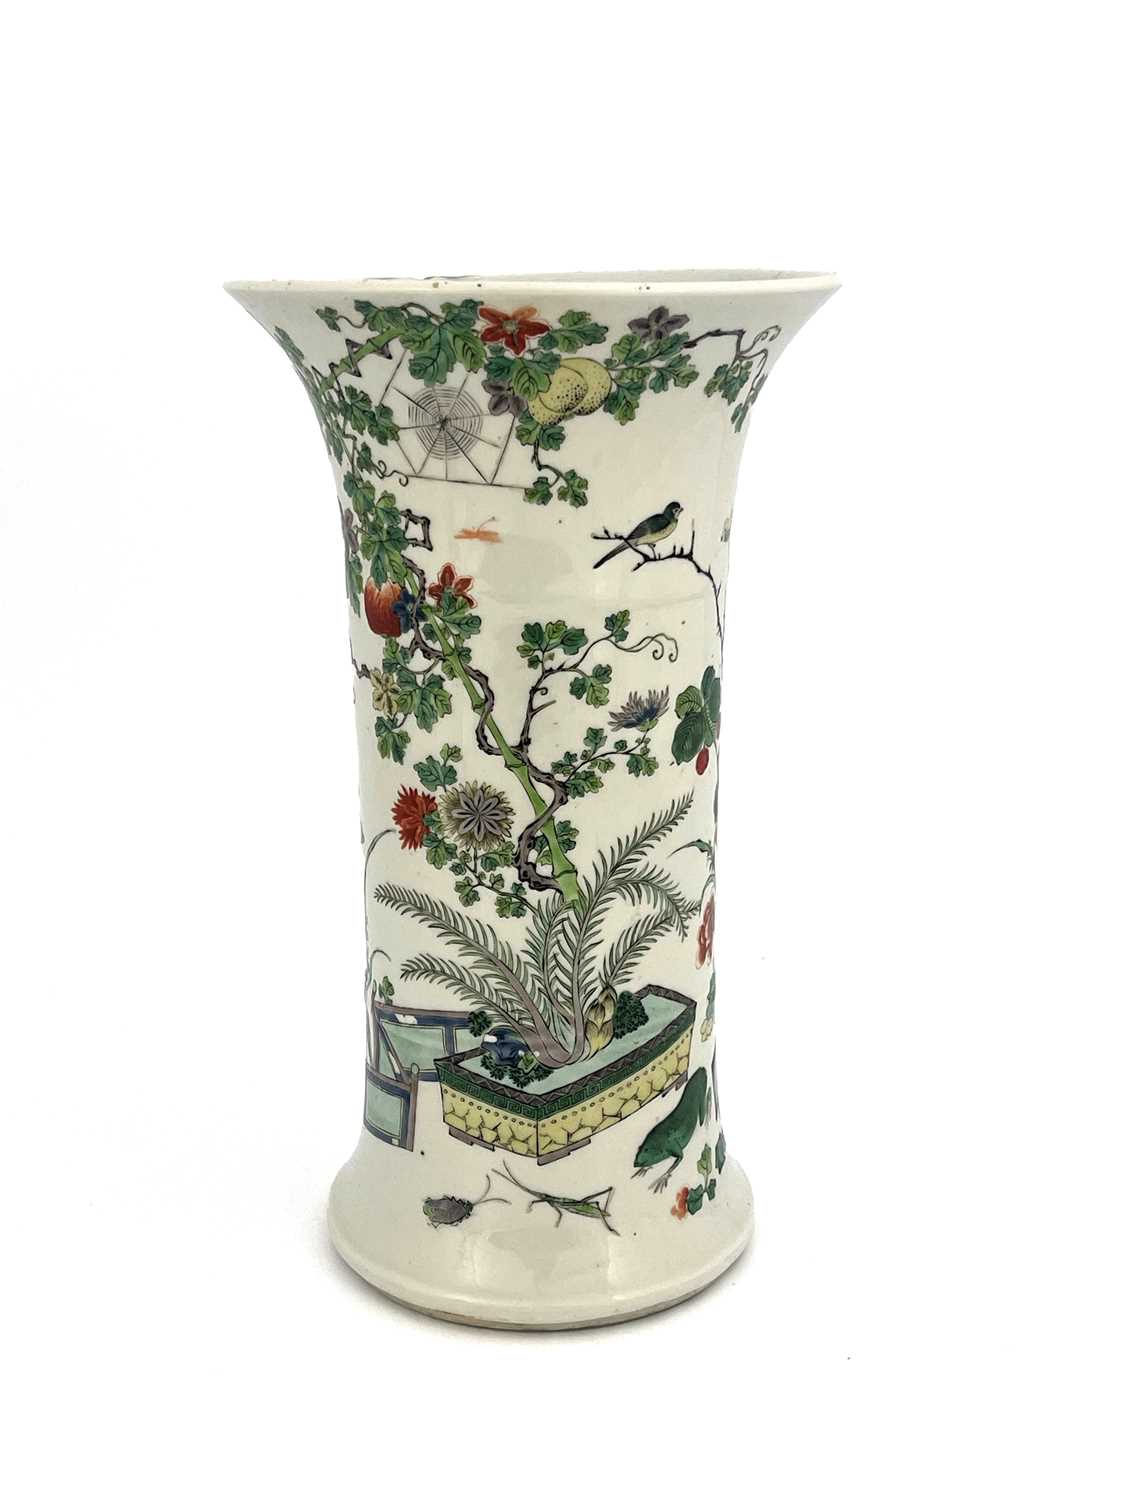 A Chinese famille verte vase, Qing dynasty, Kangxi mark and possibly of the period, Gu form